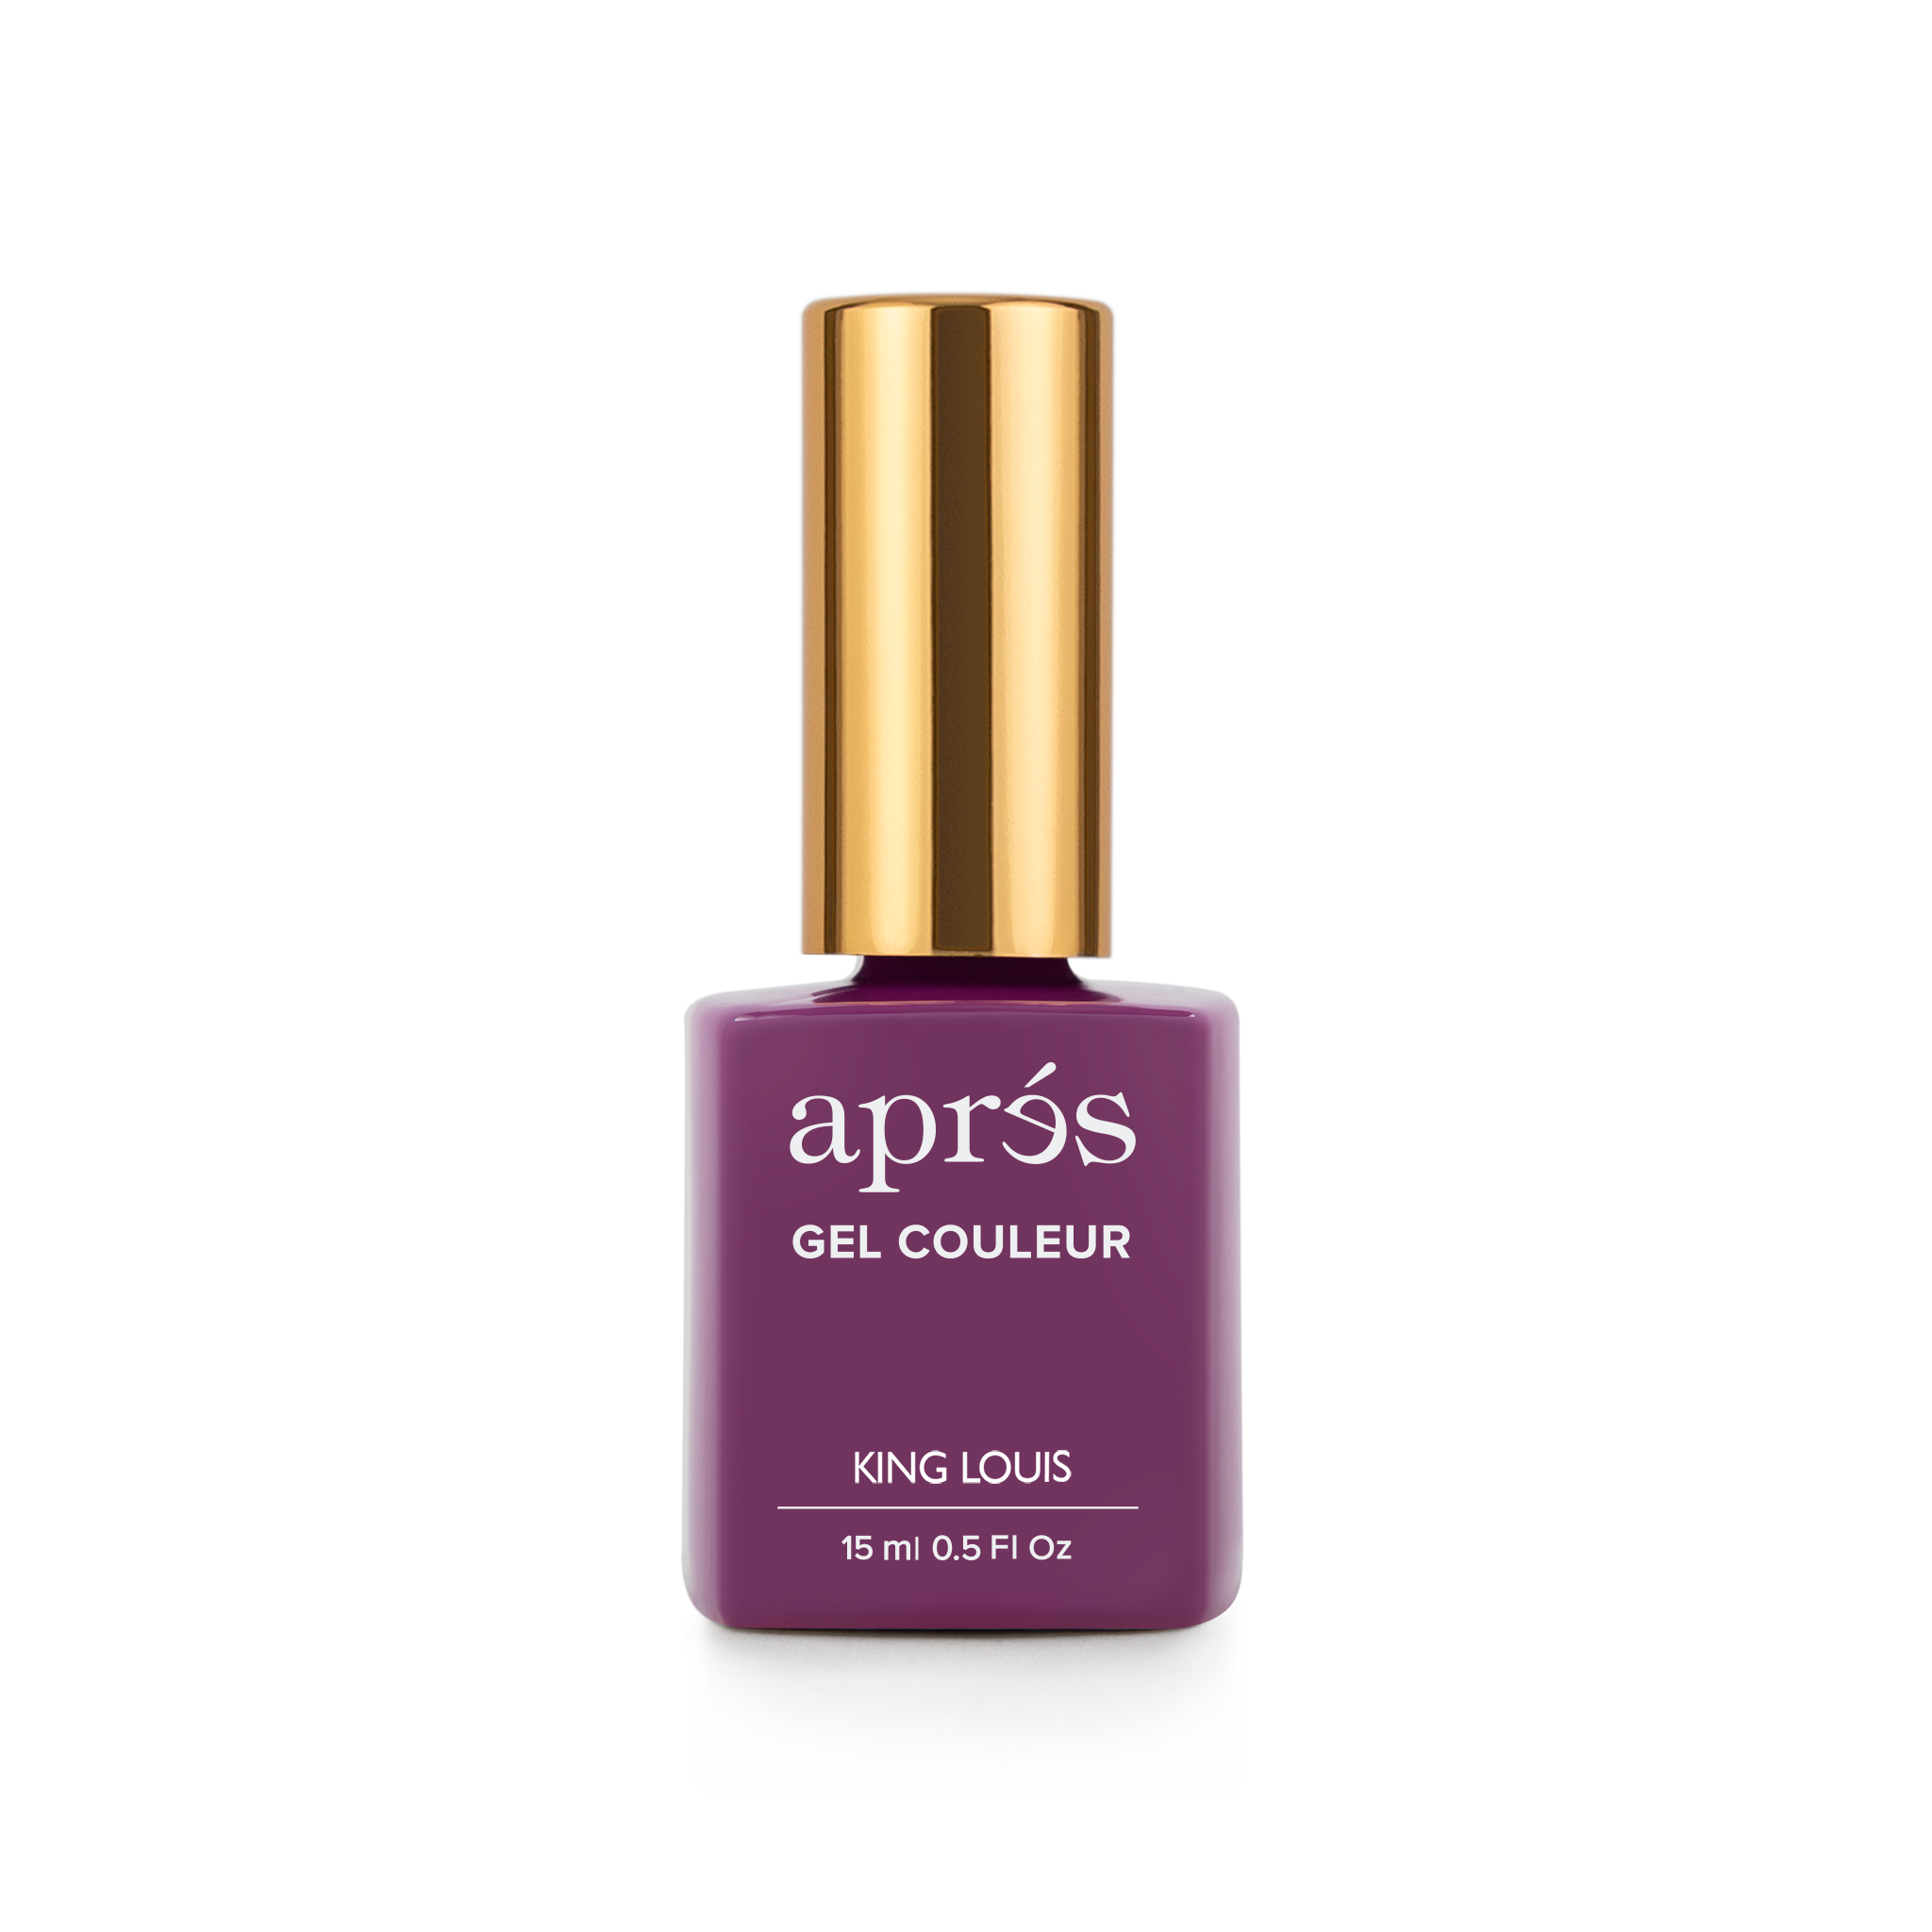 NAIL POLISH REMOVER 250ML | BYPHASSE